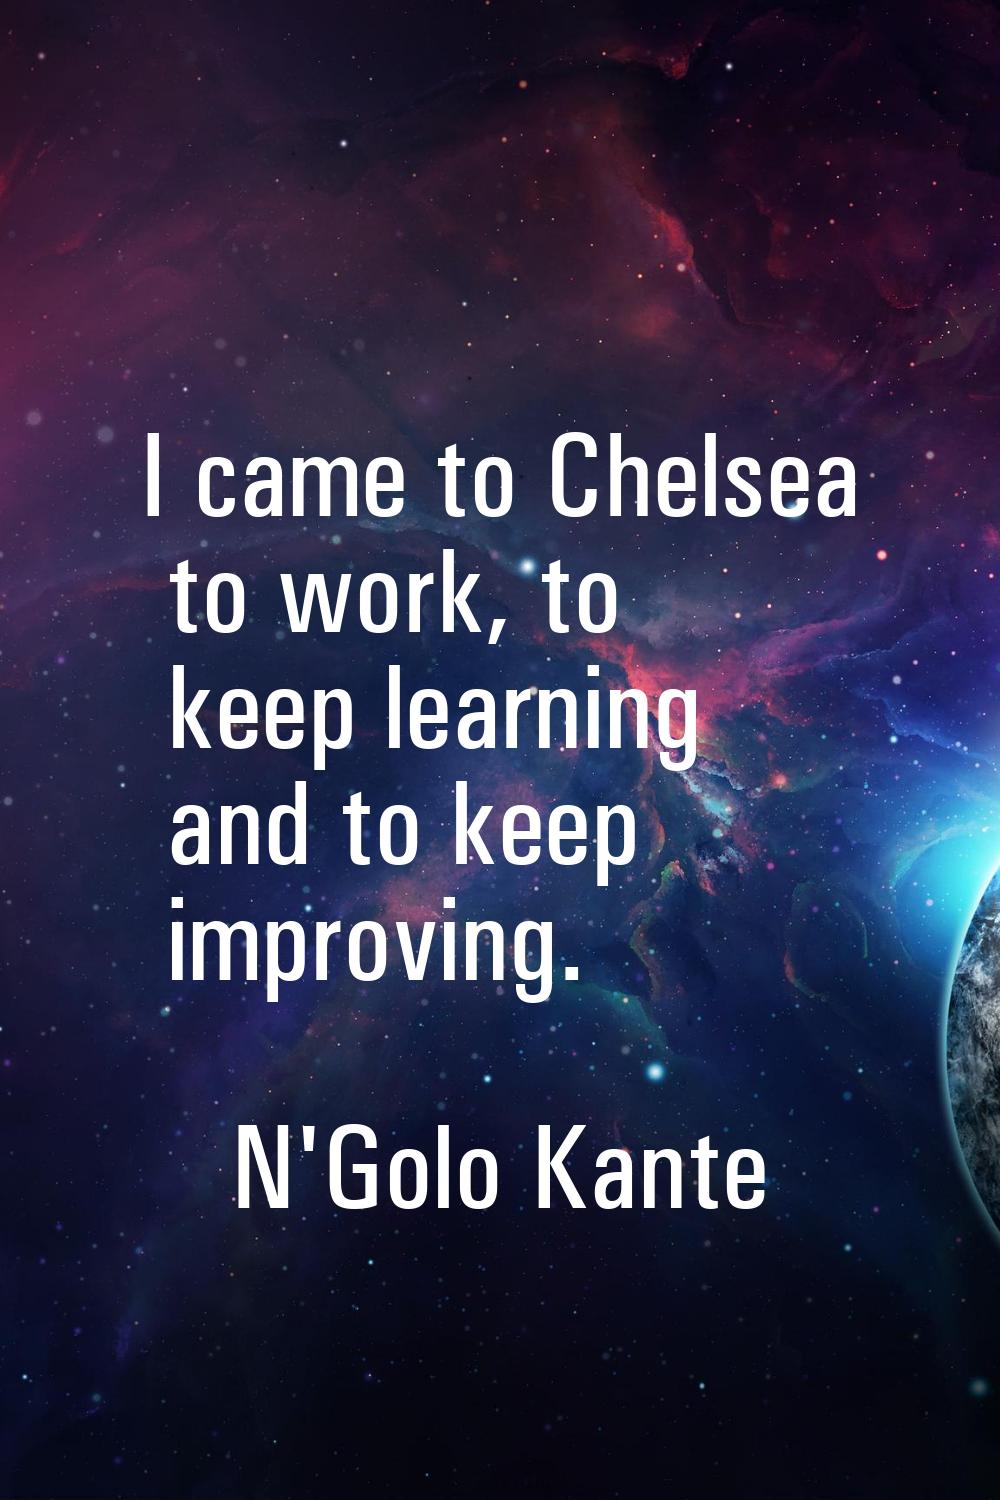 I came to Chelsea to work, to keep learning and to keep improving.